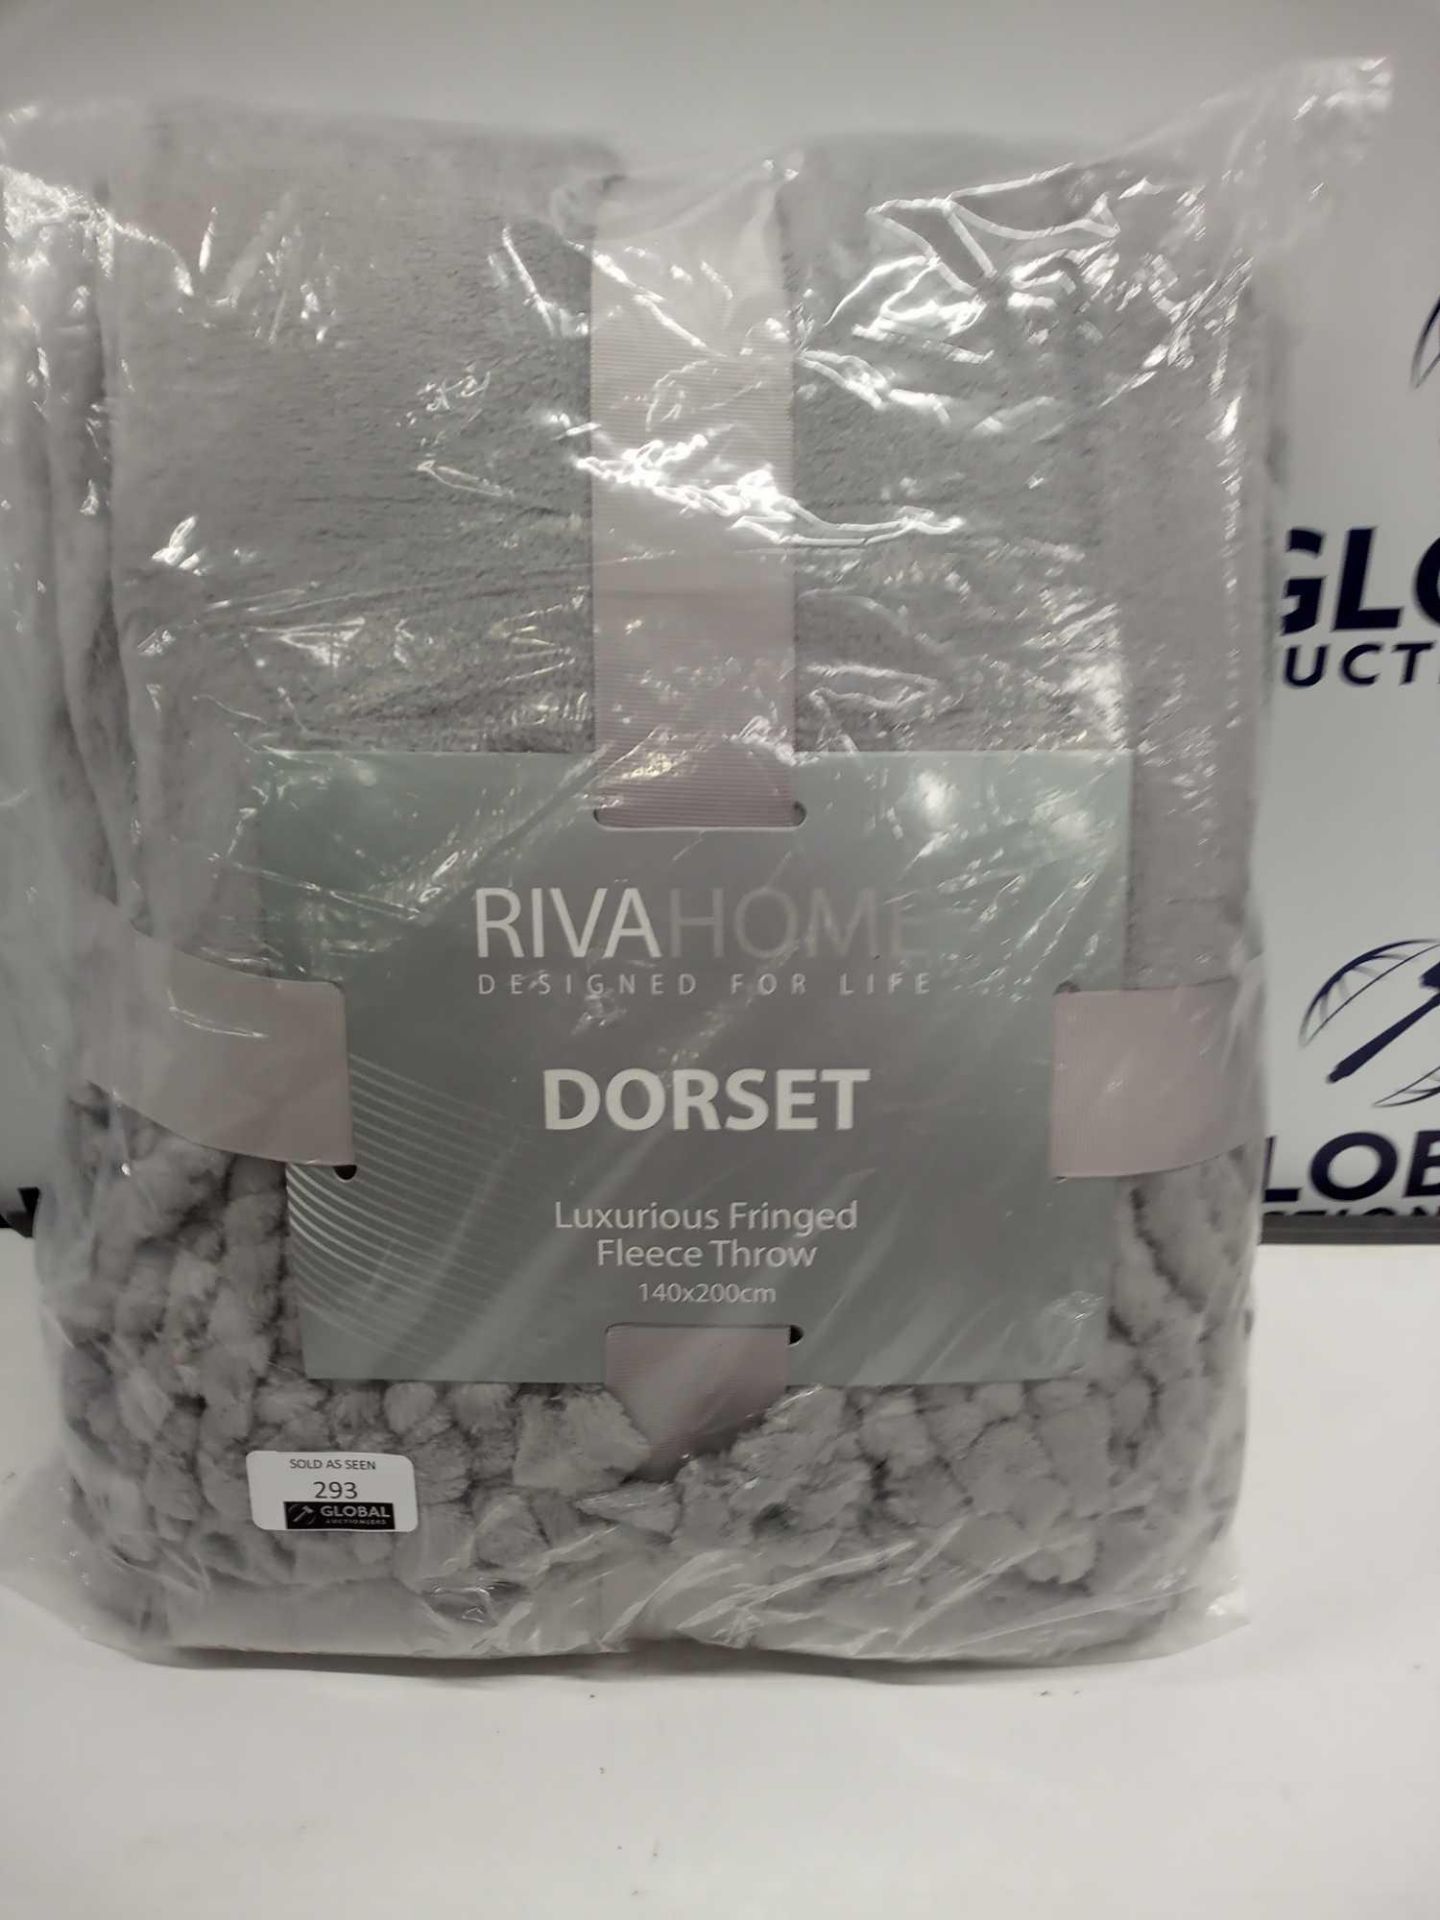 Combined RRP £140 Lot To Contain Rivahome Dorset Luxurious Fringed Fleece Throw And Unbagged Gaveno - Image 2 of 2